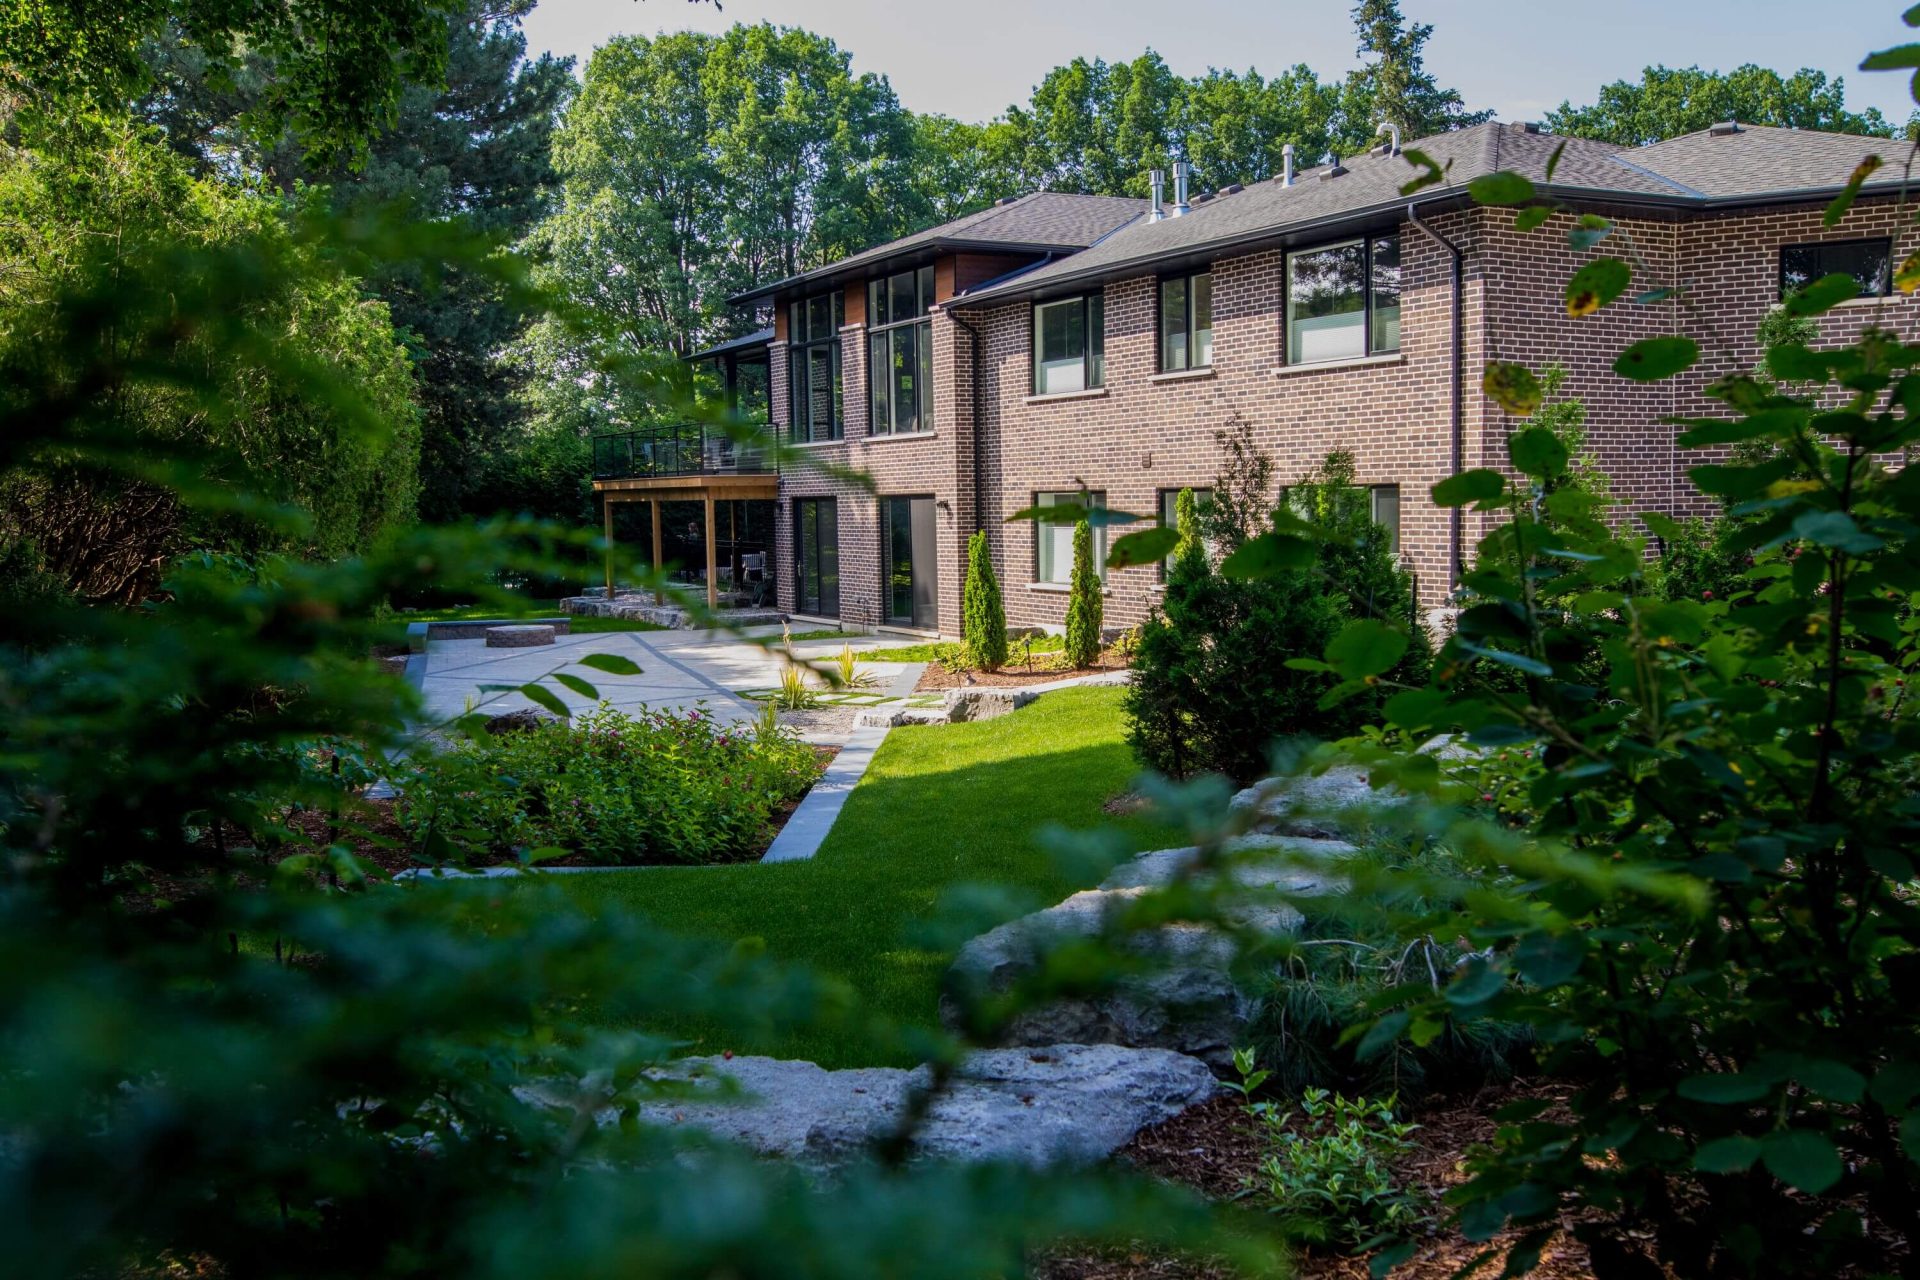 A modern two-story brick house with large windows and a balcony, surrounded by a lush garden, green lawn, and a stone walkway in a serene setting.